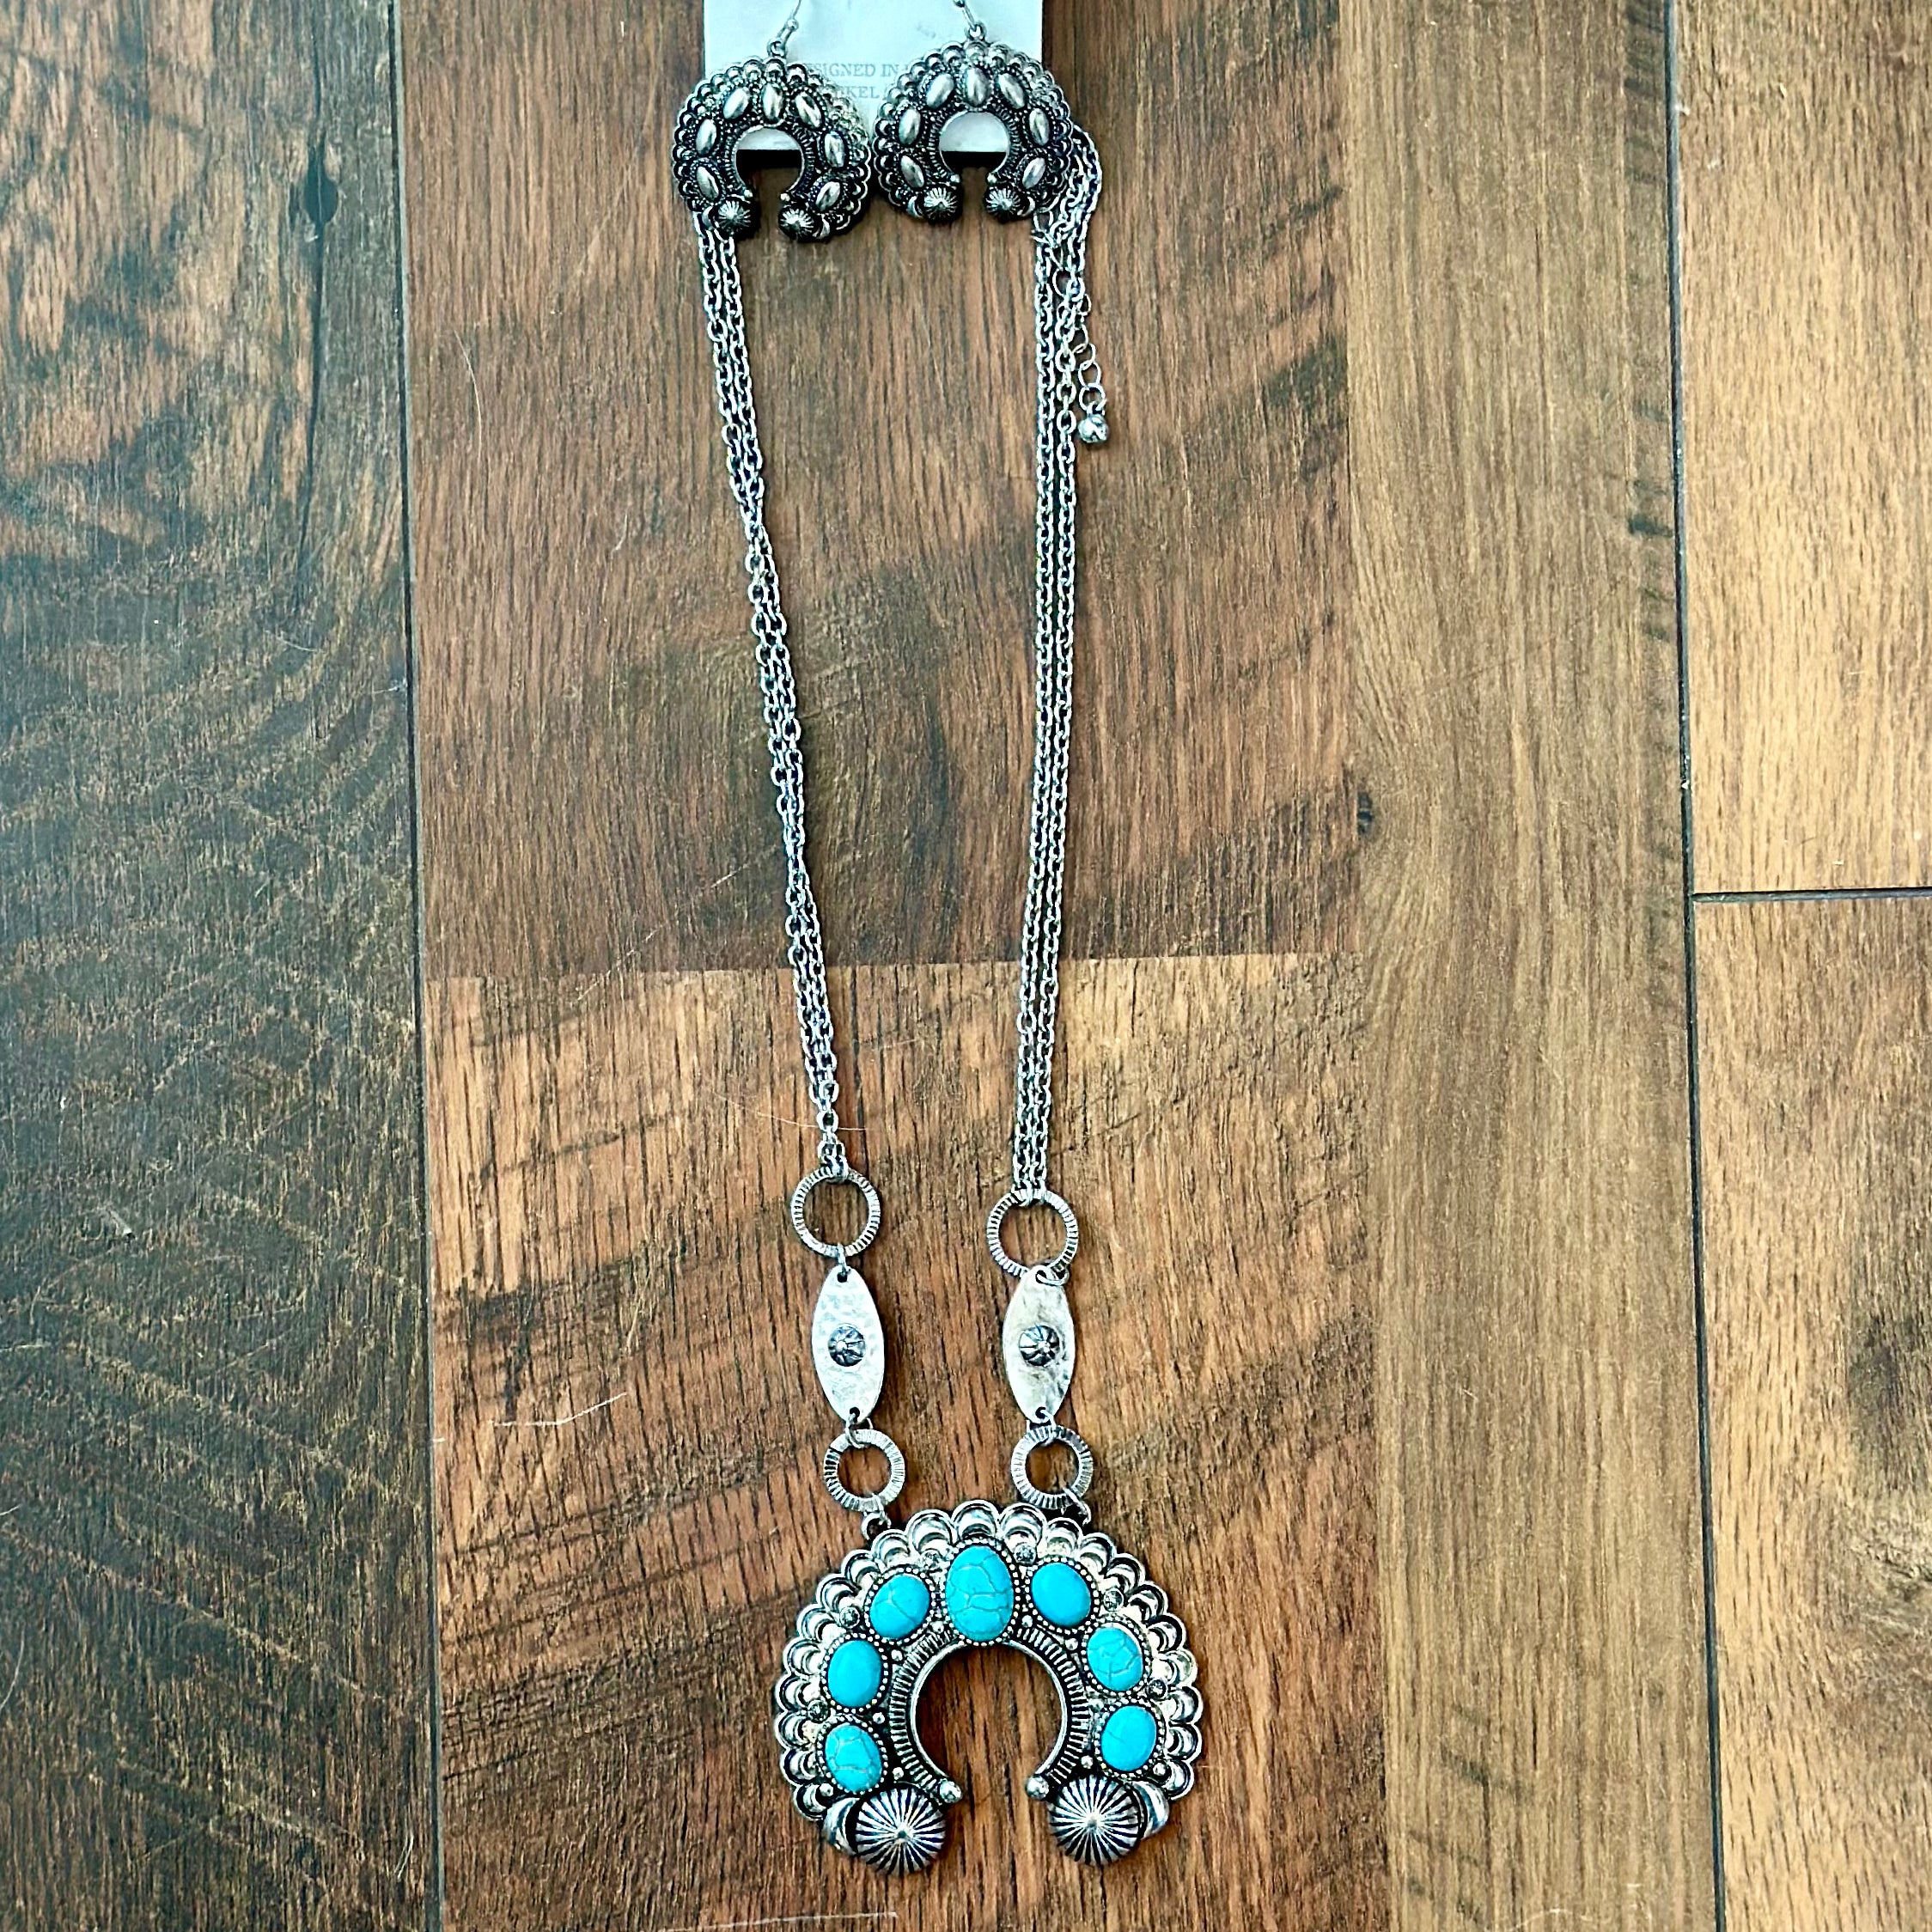 Squash Blossom Necklace and Earring Set